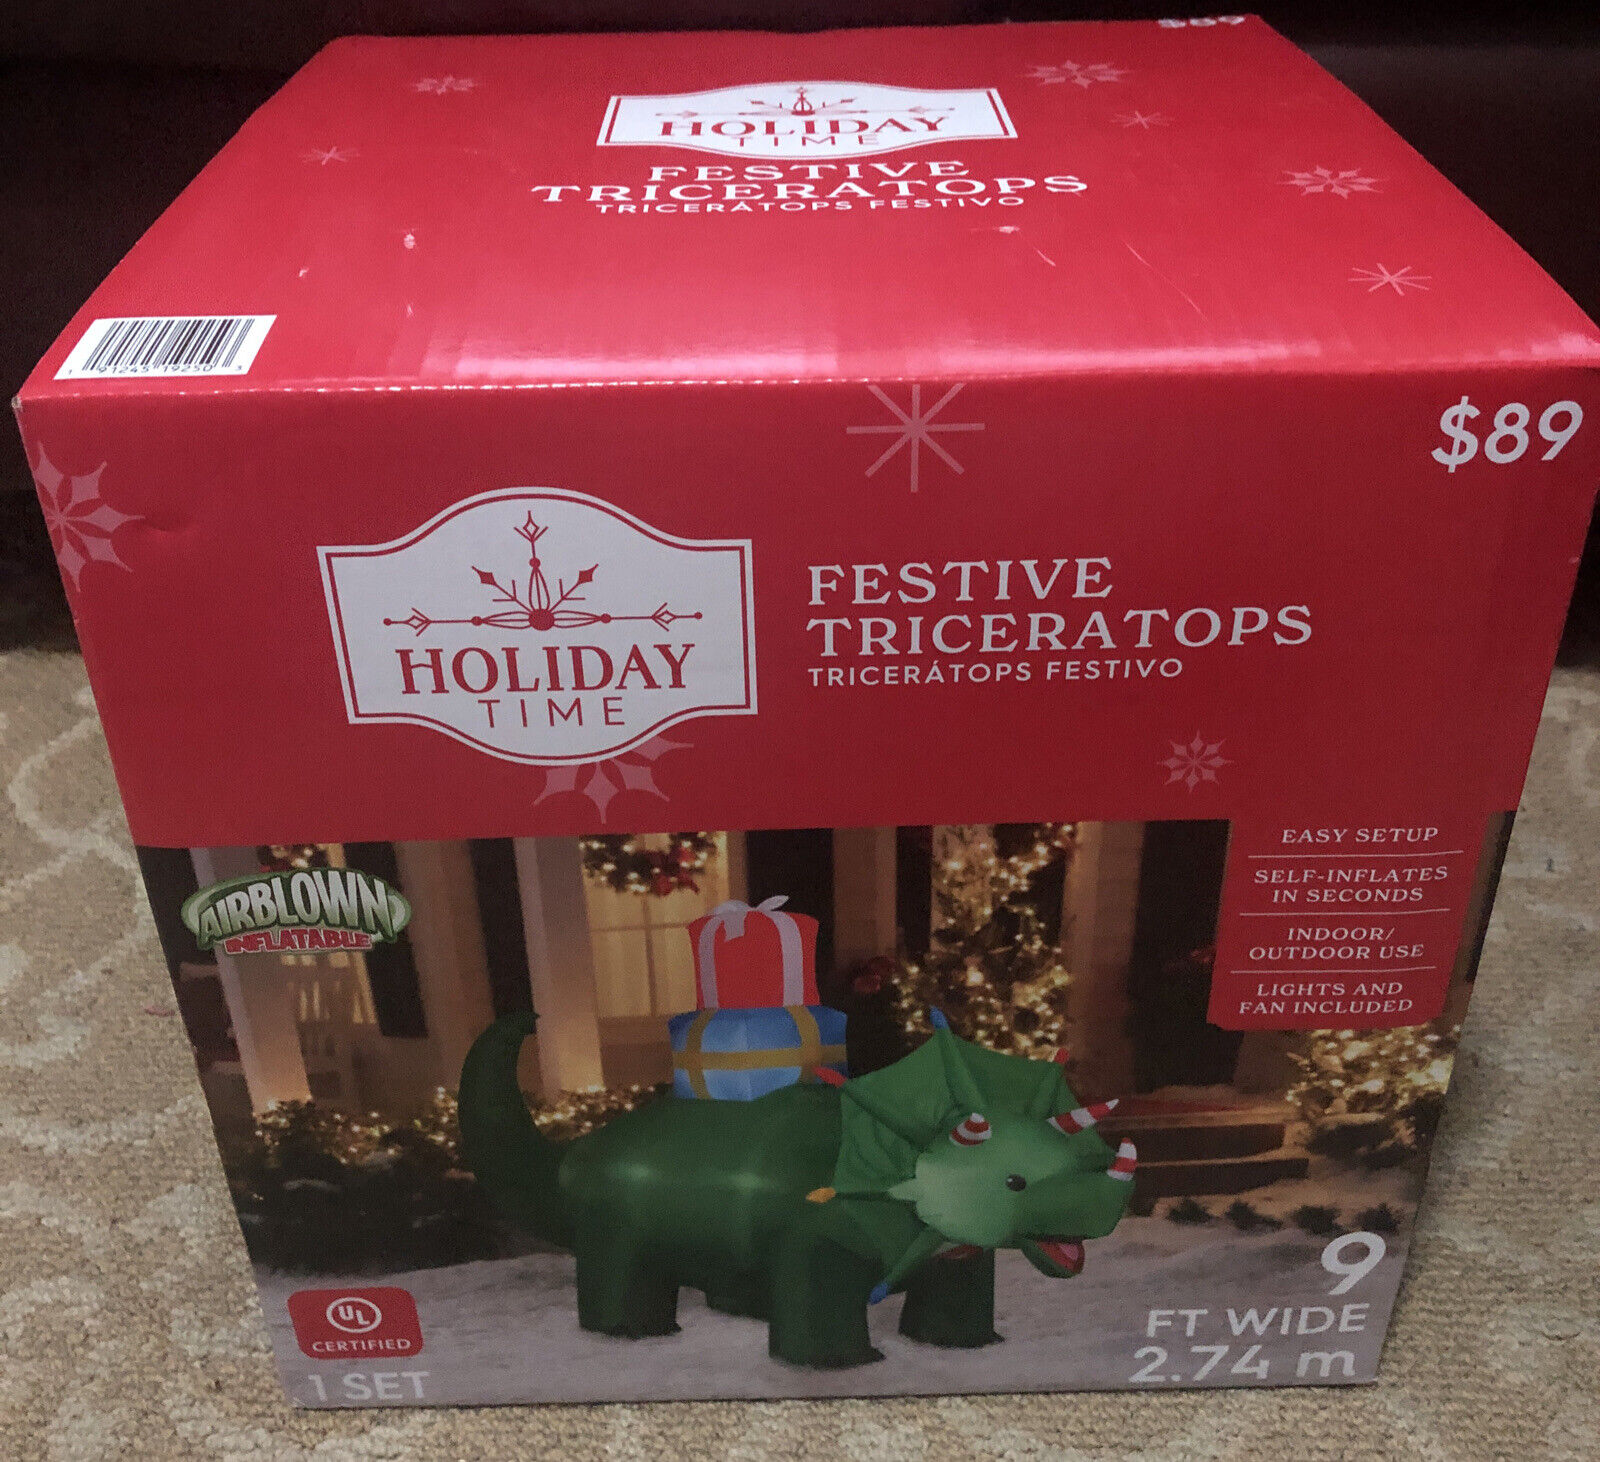 9ft WIDE Festive Triceratops Gift Boxes Airblown Inflatable Holiday Christmas